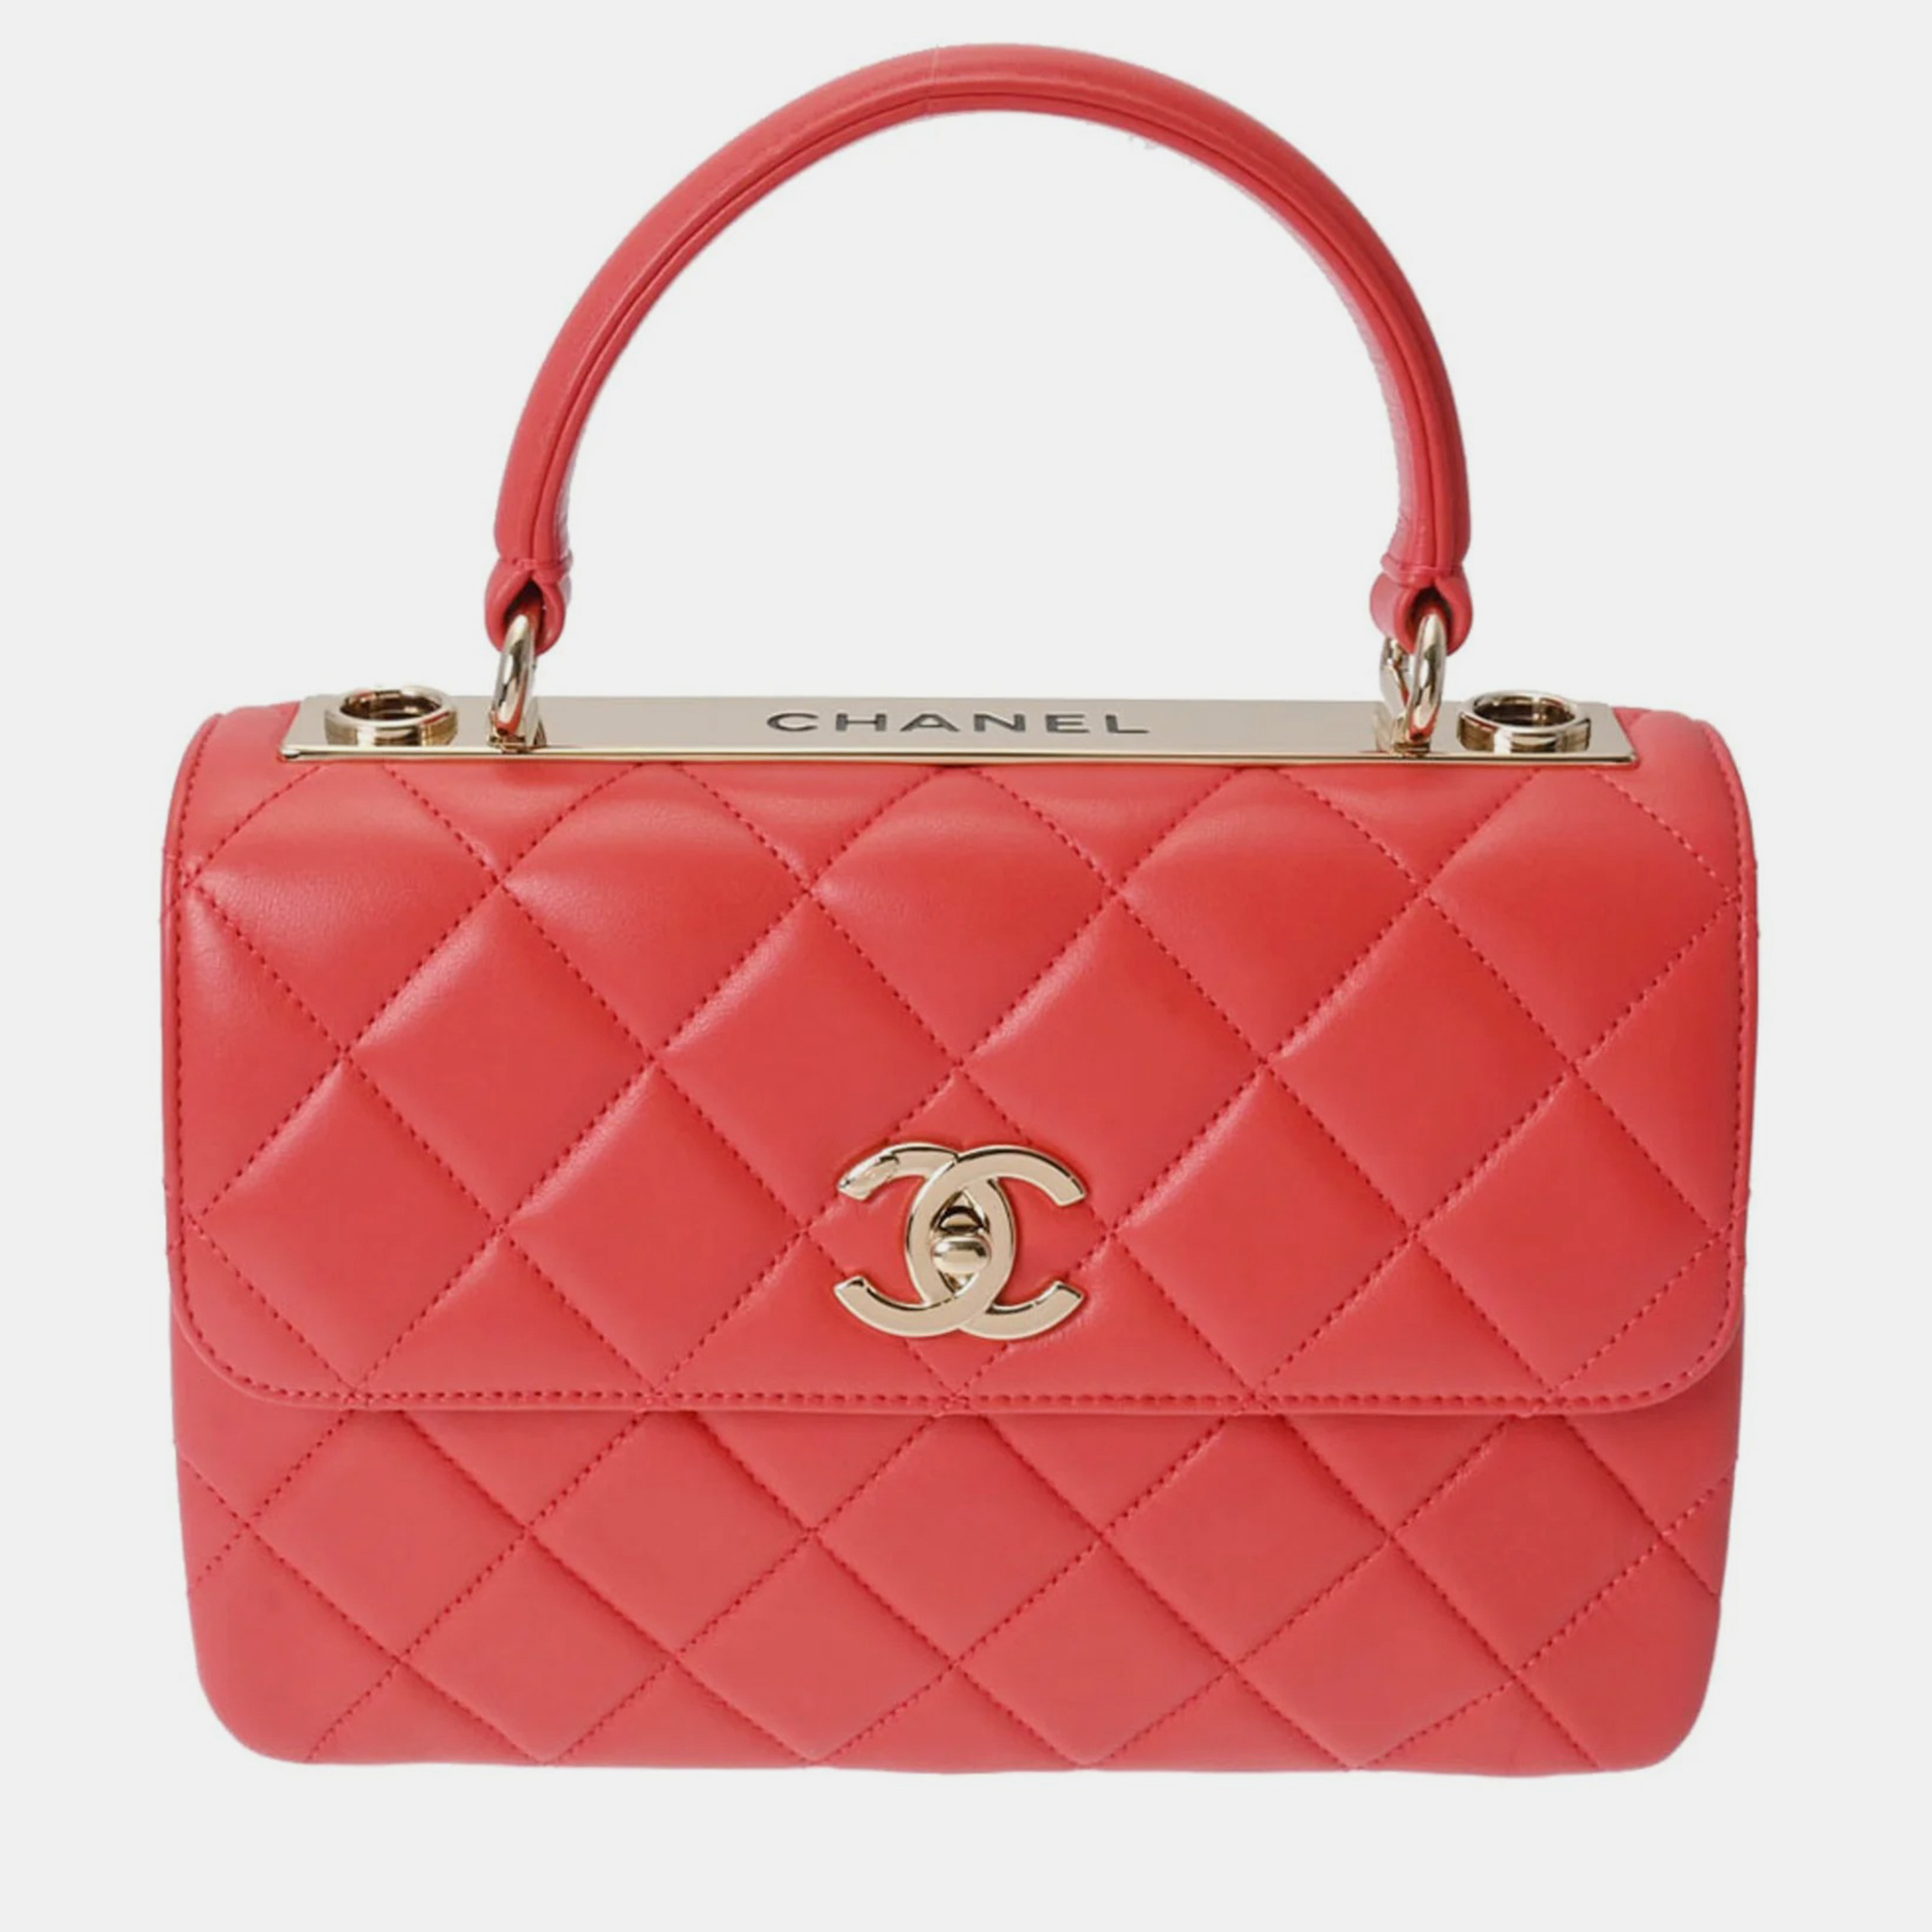 Chanel red leather small trendy cc shoulder bags